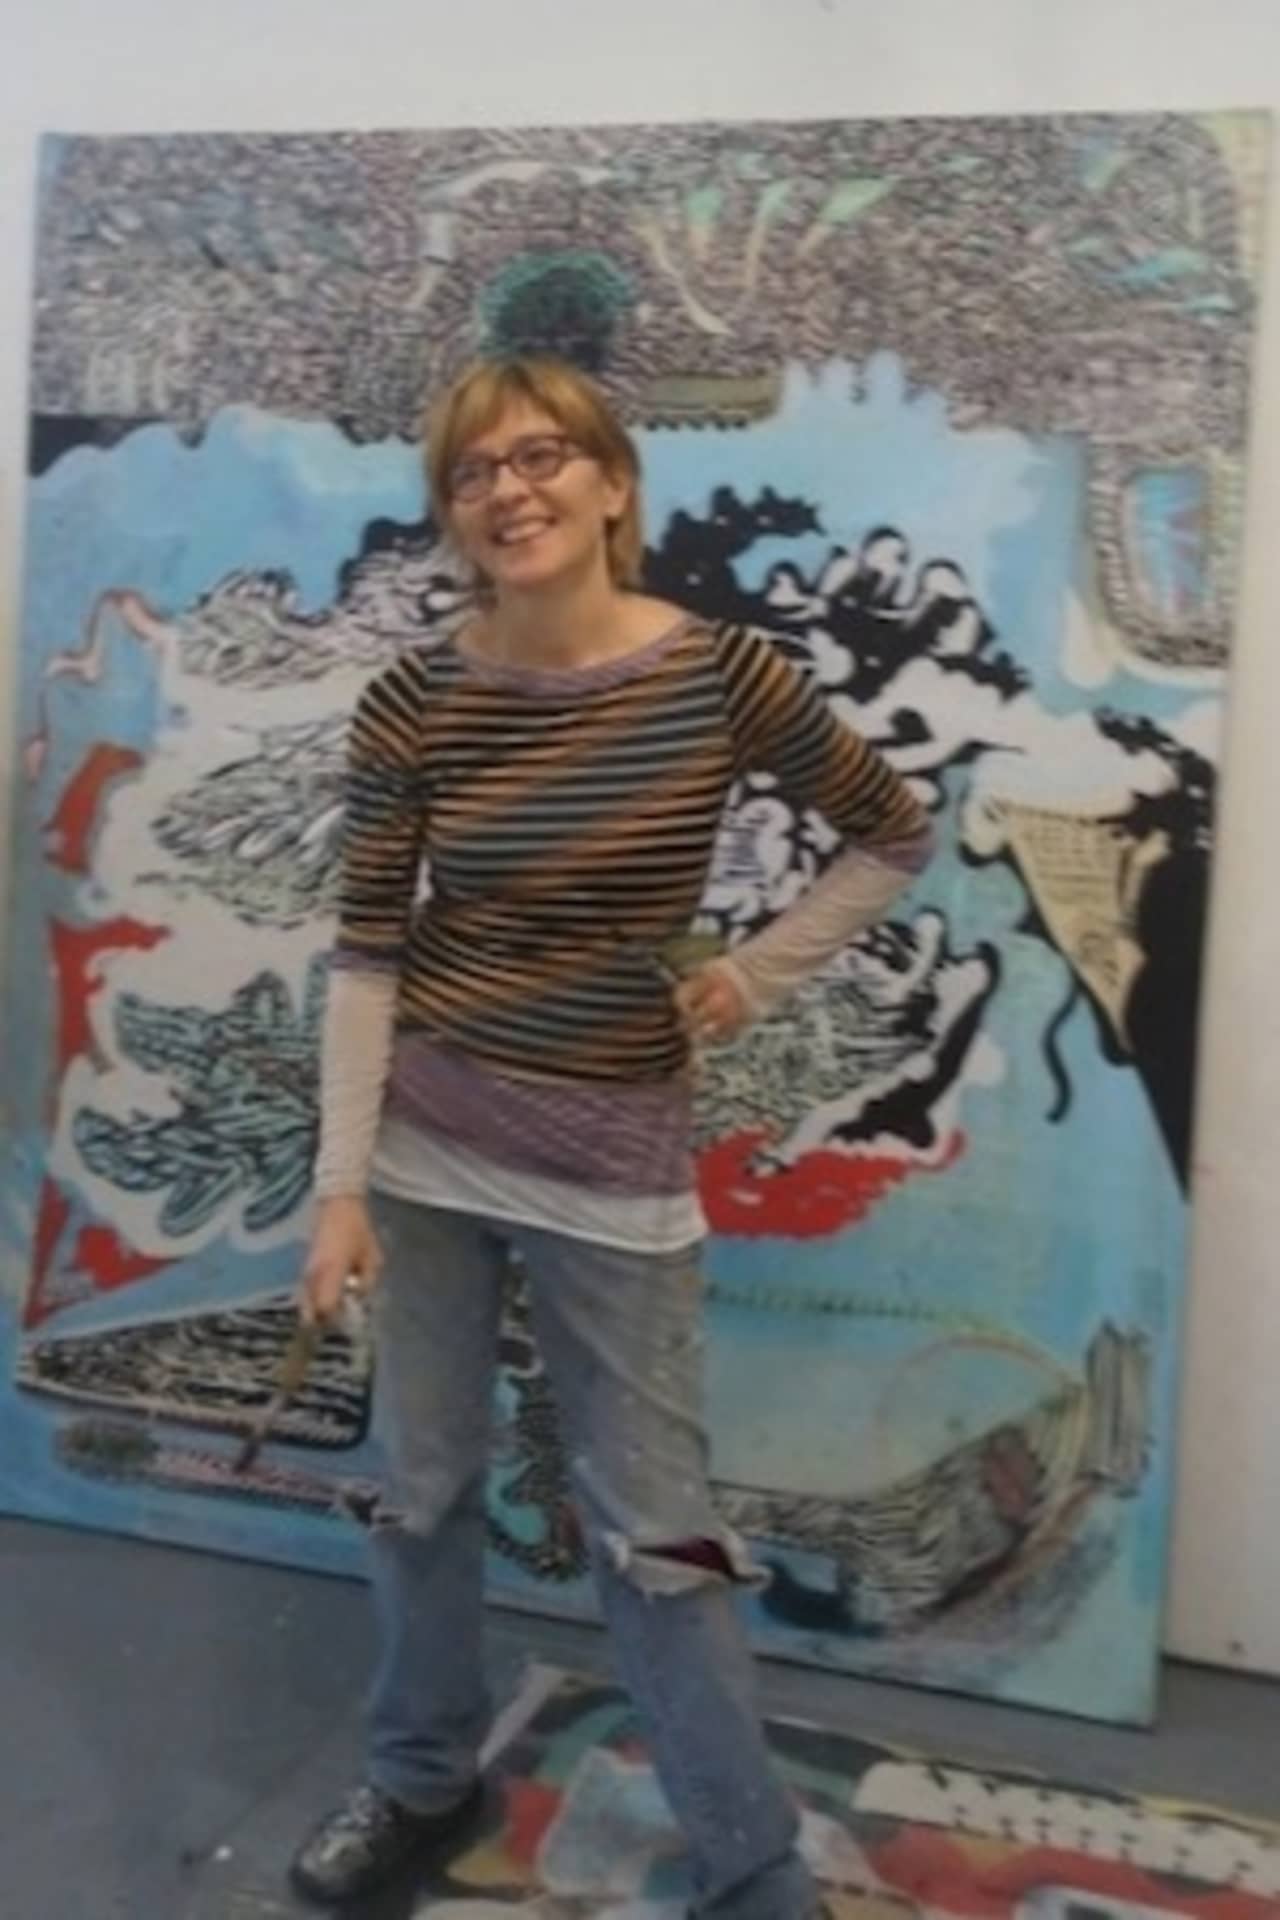 Sharon Horvath, a professor of painting and drawing at Purchase College in Harrison, has won a Fulbright Grant to study art in India next year.